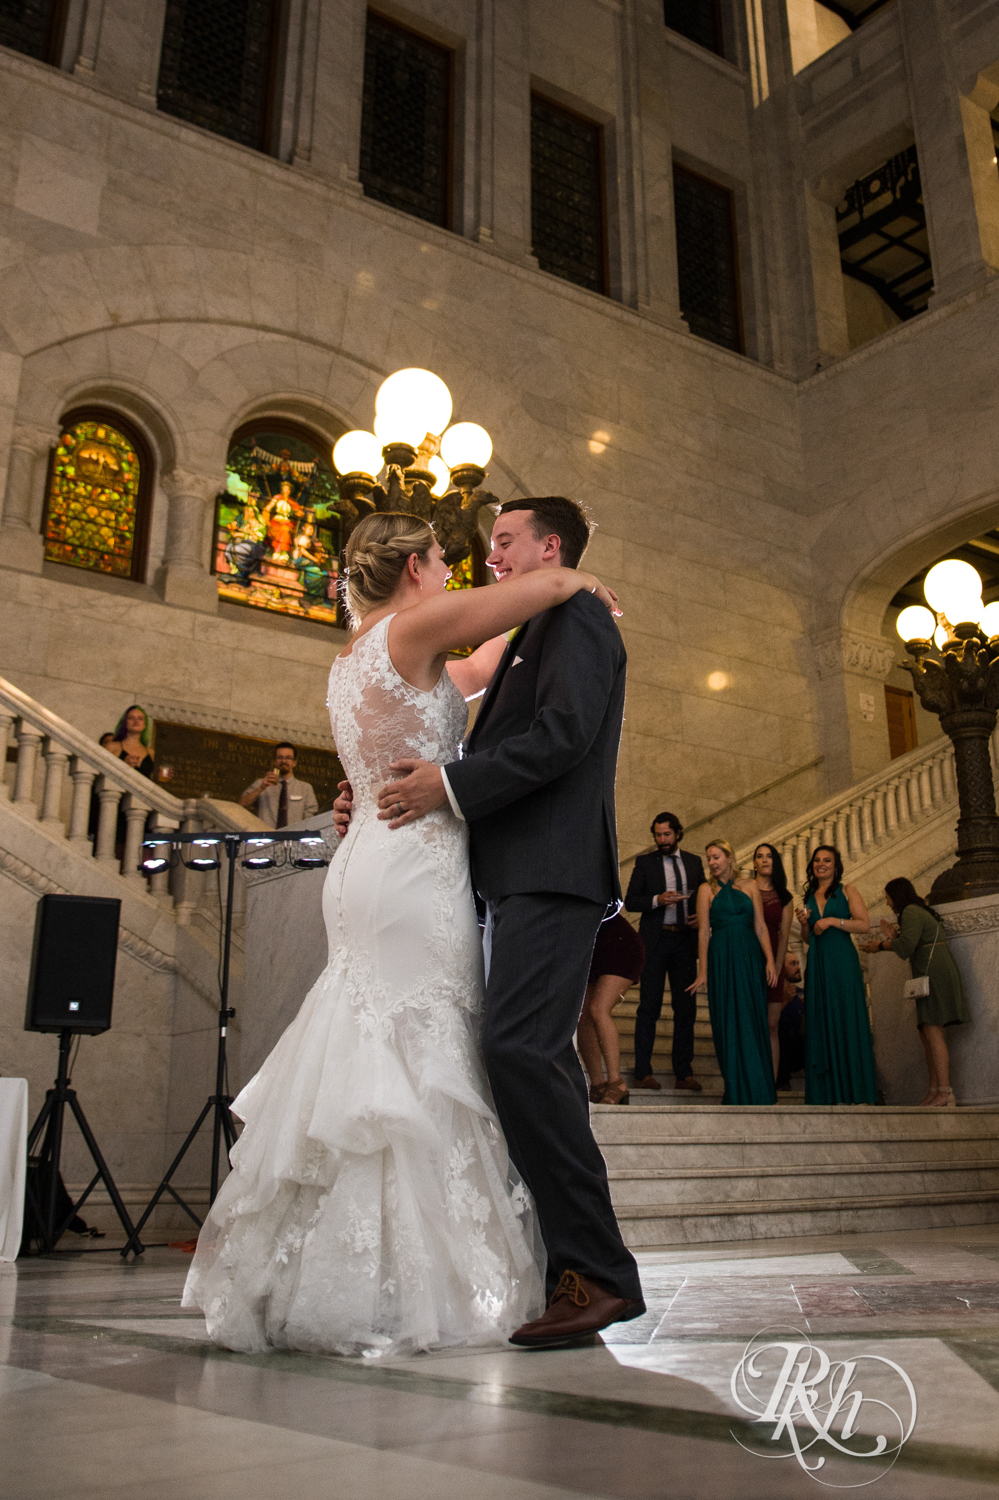 Bride and groom dance at wedding reception in Minneapolis City Hall in Minneapolis, Minnesota.